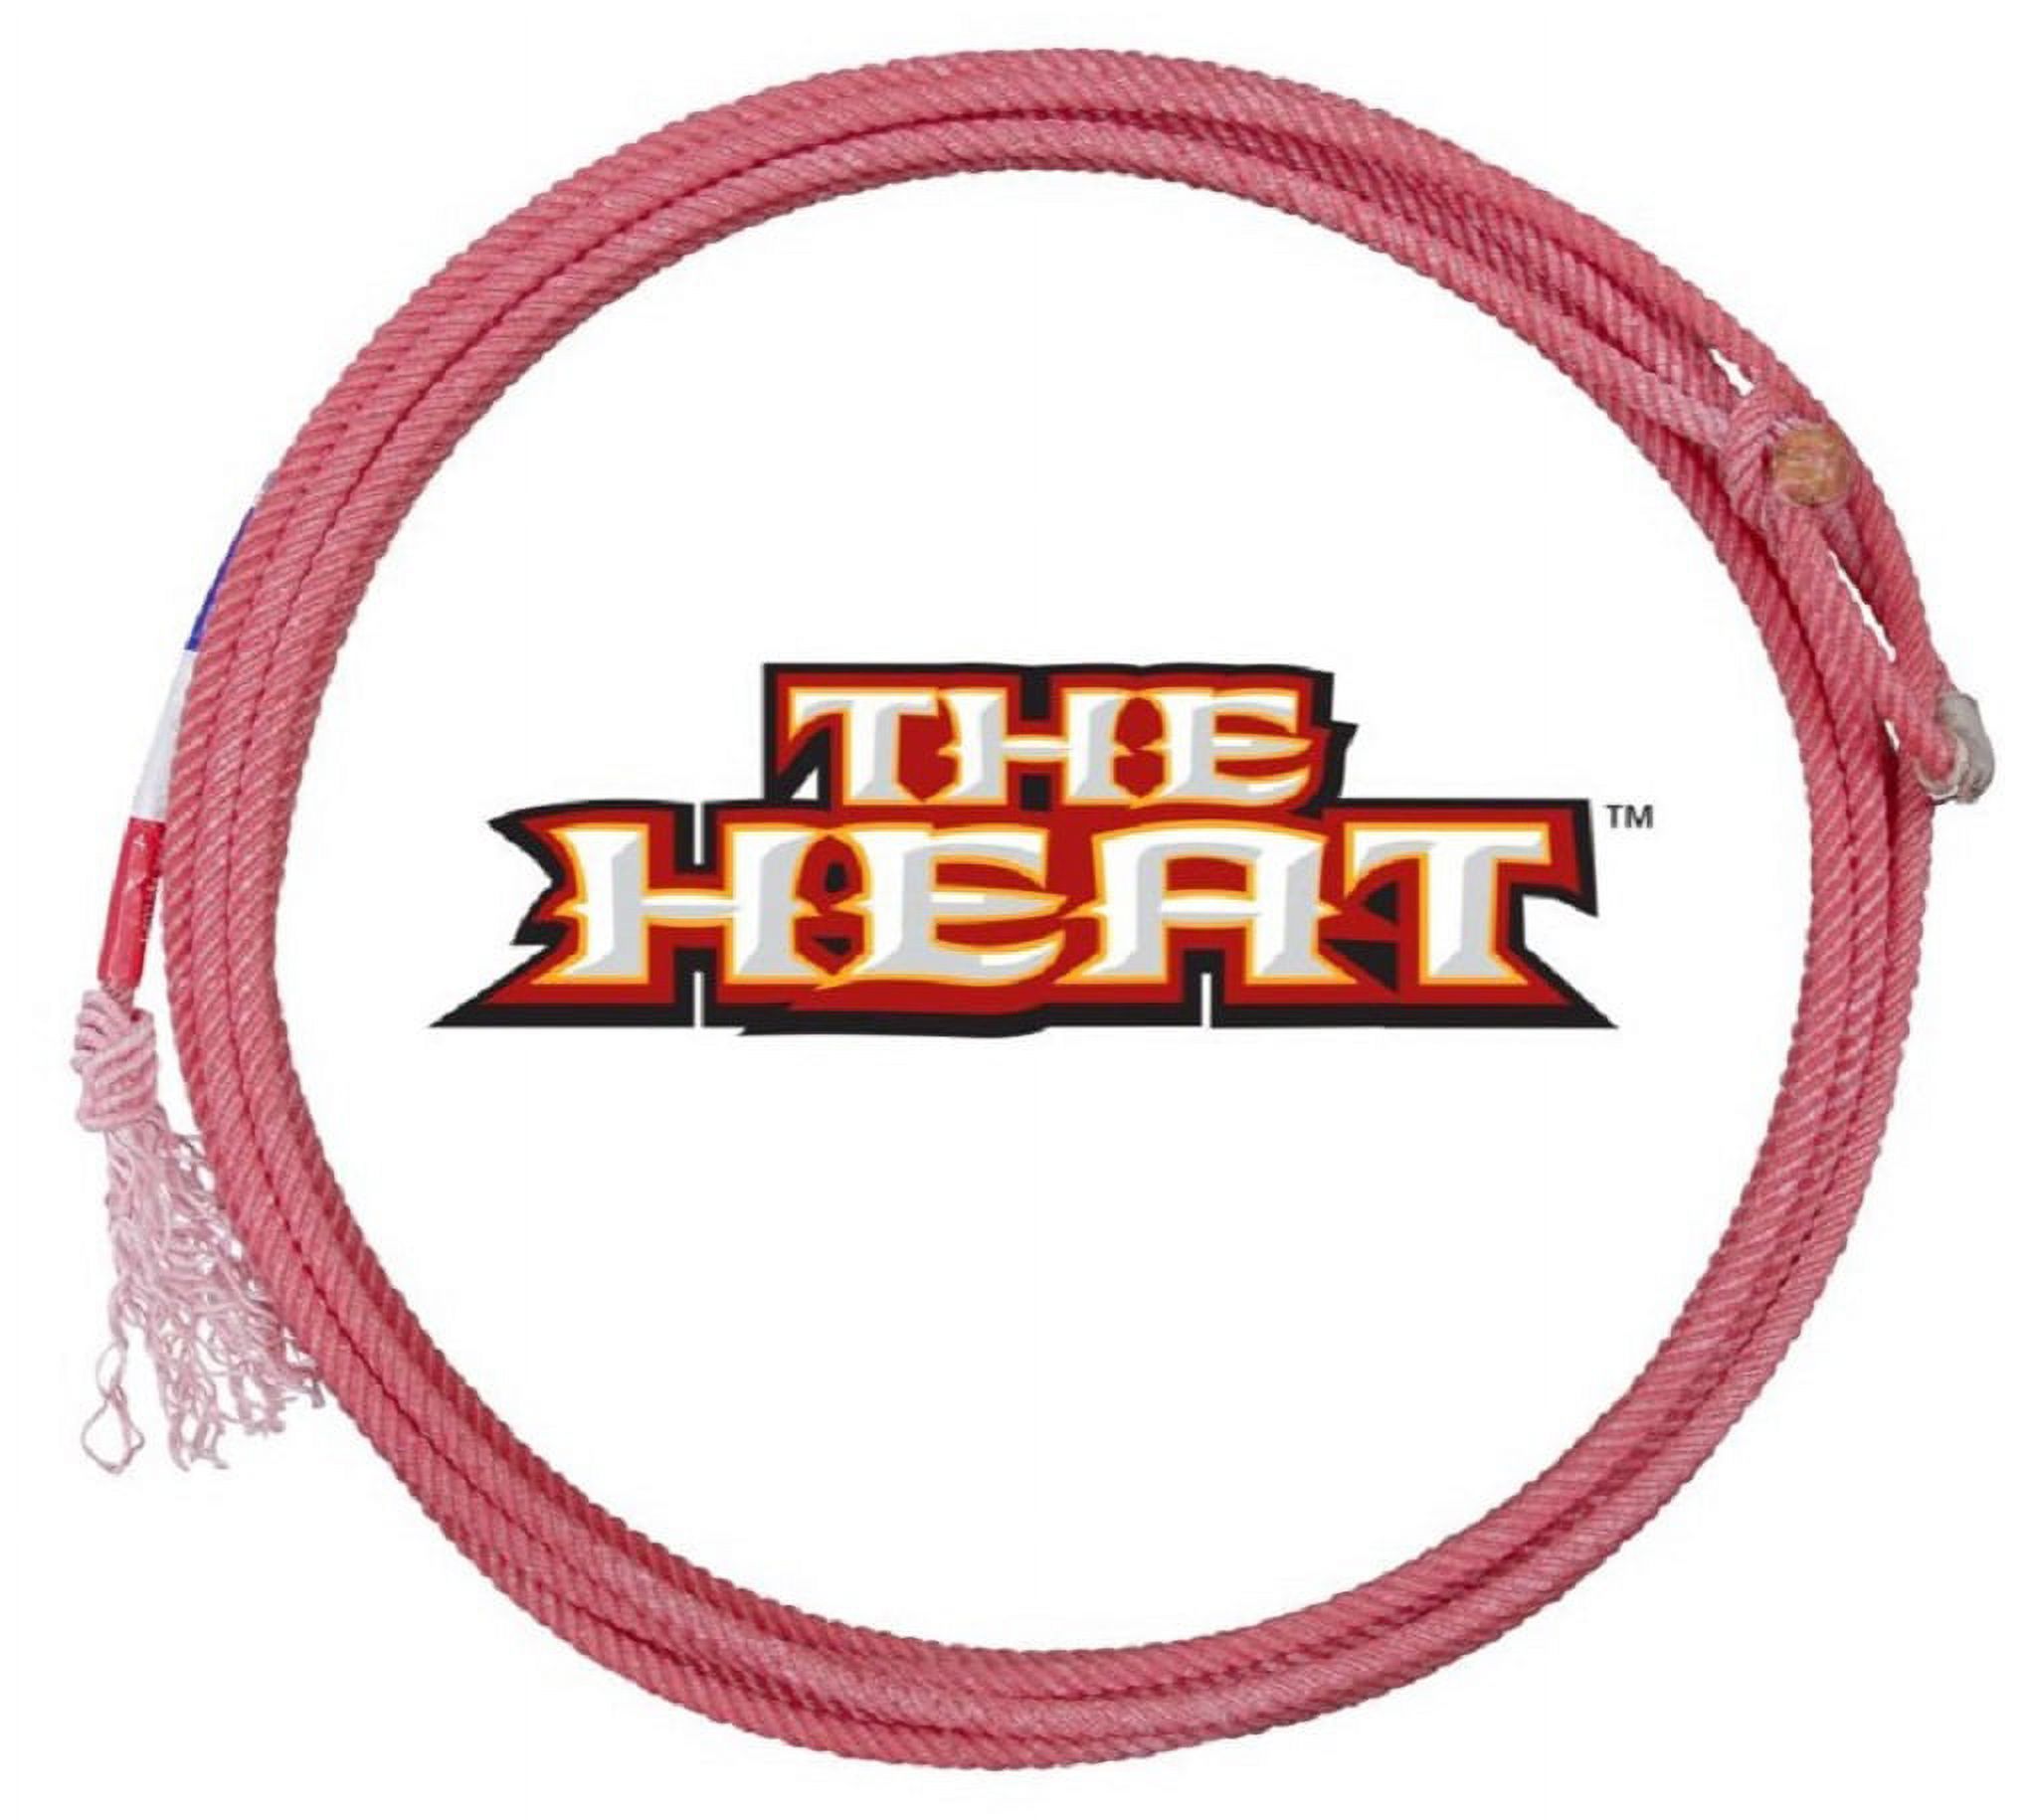 Classic Heat 4 Strand 30 ft 3/8in True Head Rope  XS - image 1 of 2